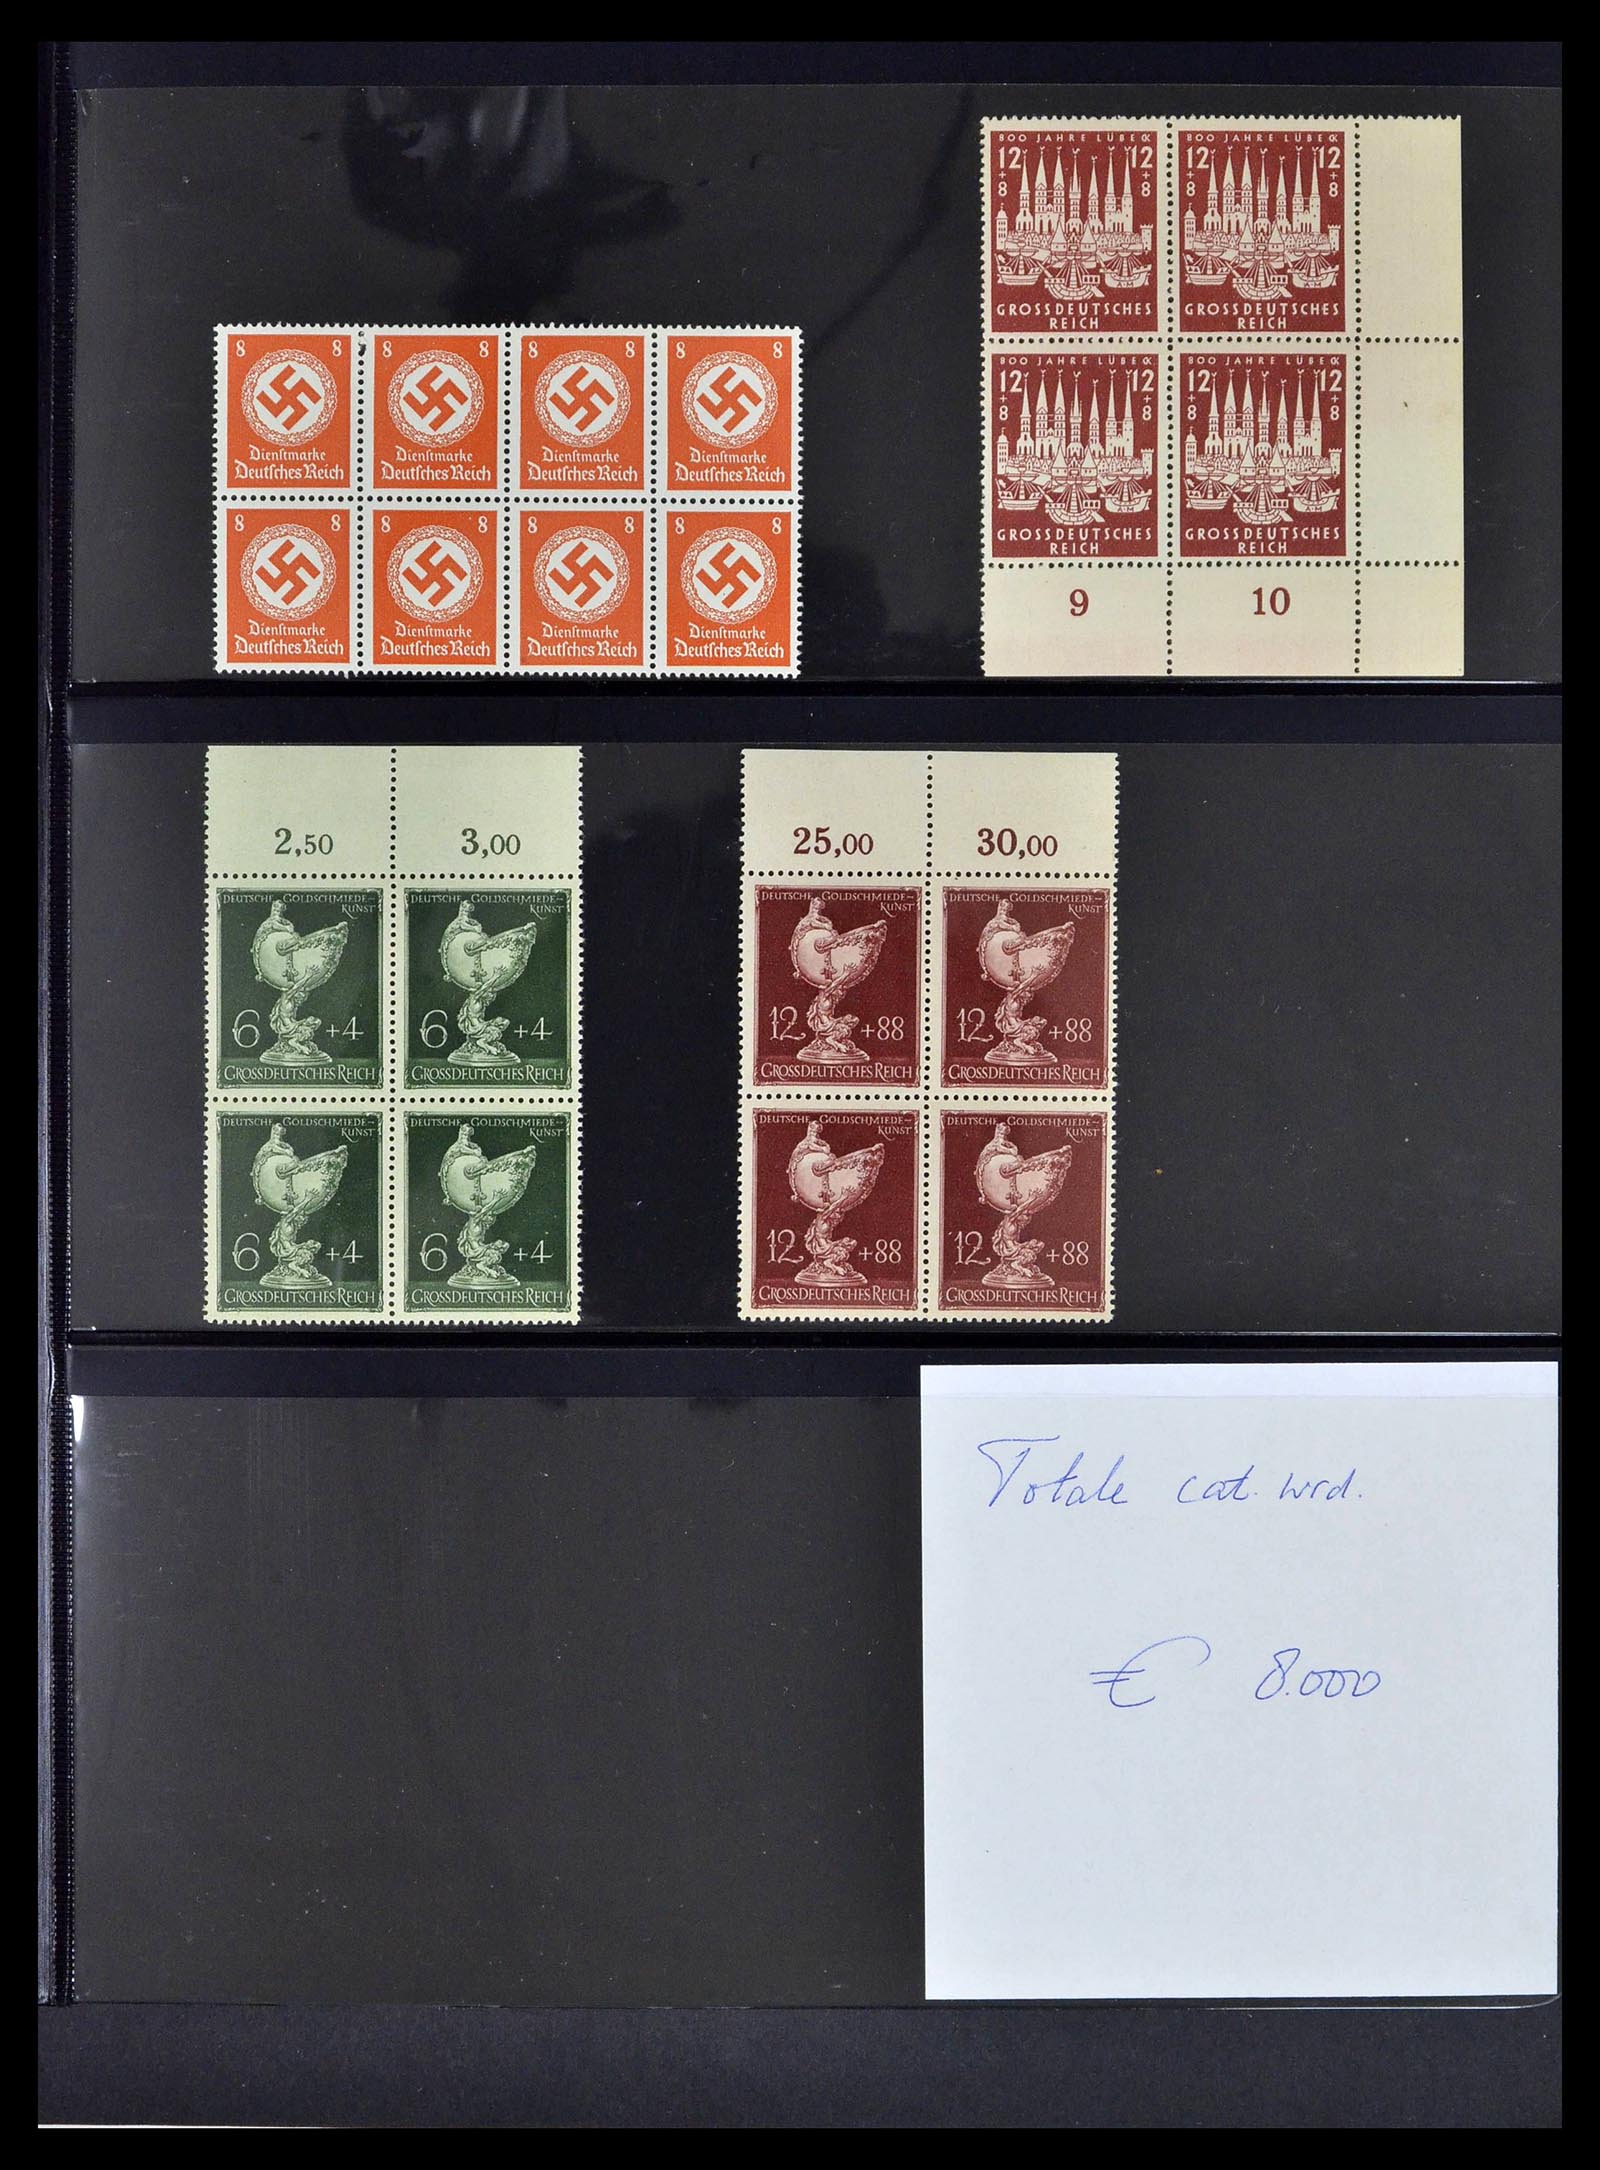 39255 0043 - Stamp collection 39255 German Reich MNH blocks of 4.